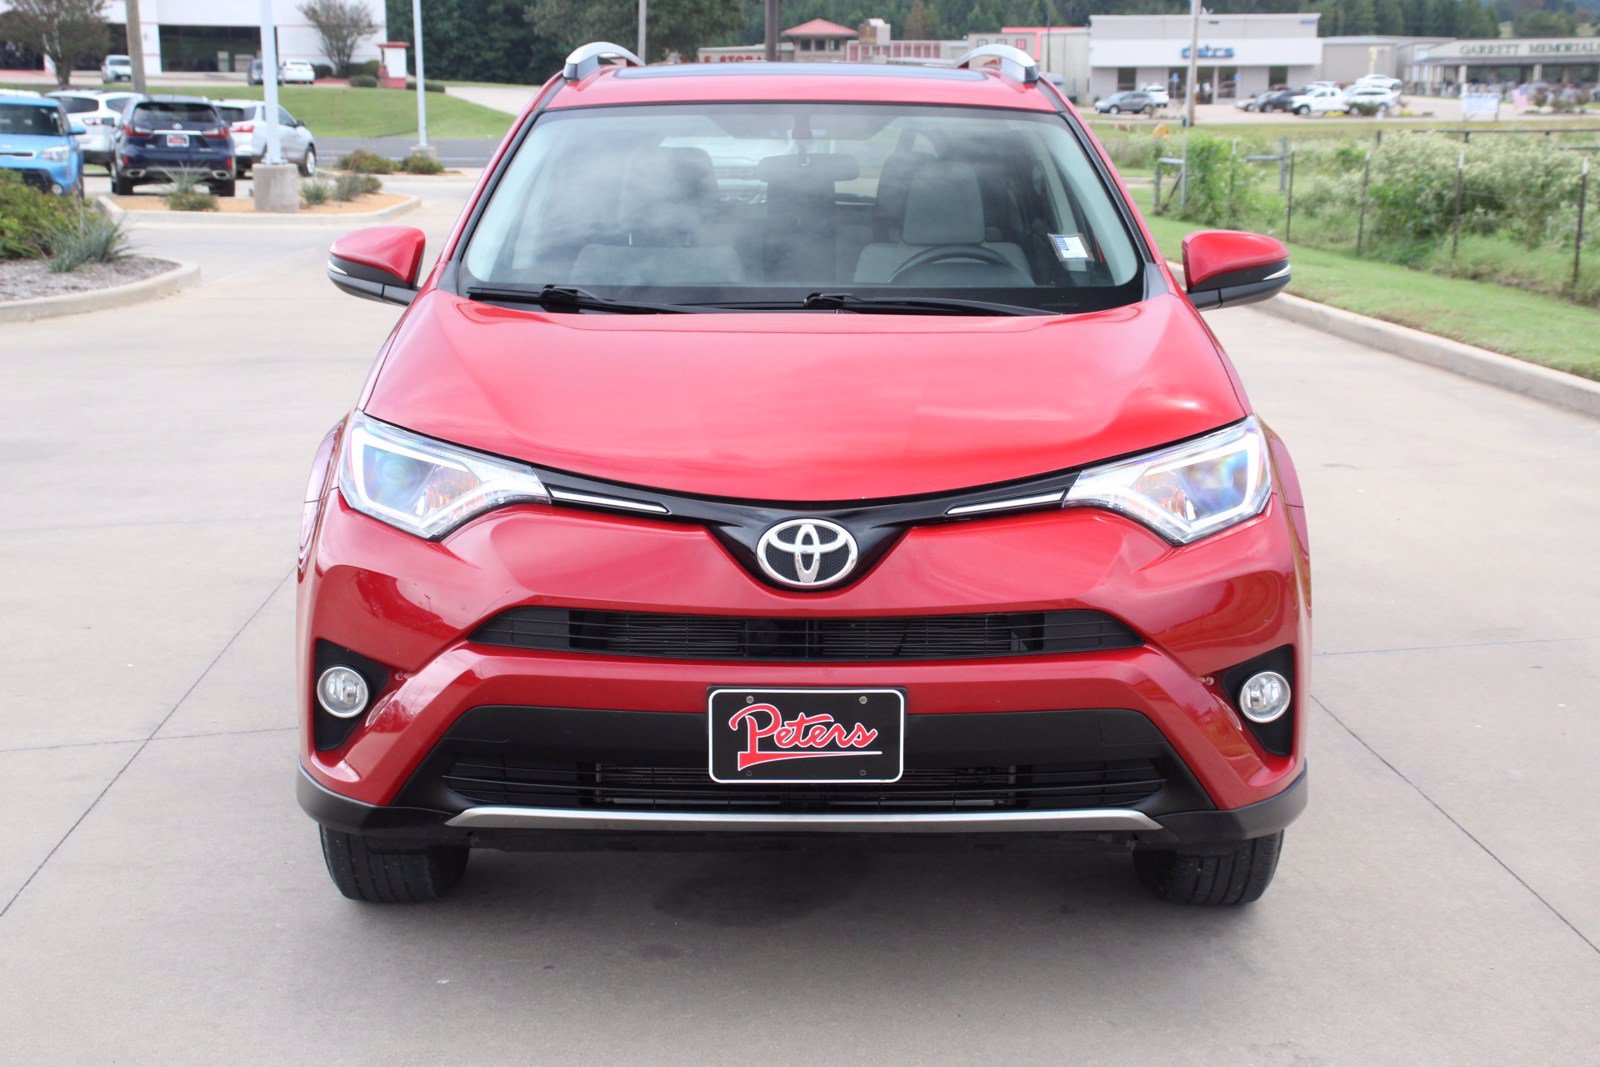 PreOwned 2016 Toyota RAV4 XLE SUV in Longview A4430A Peters